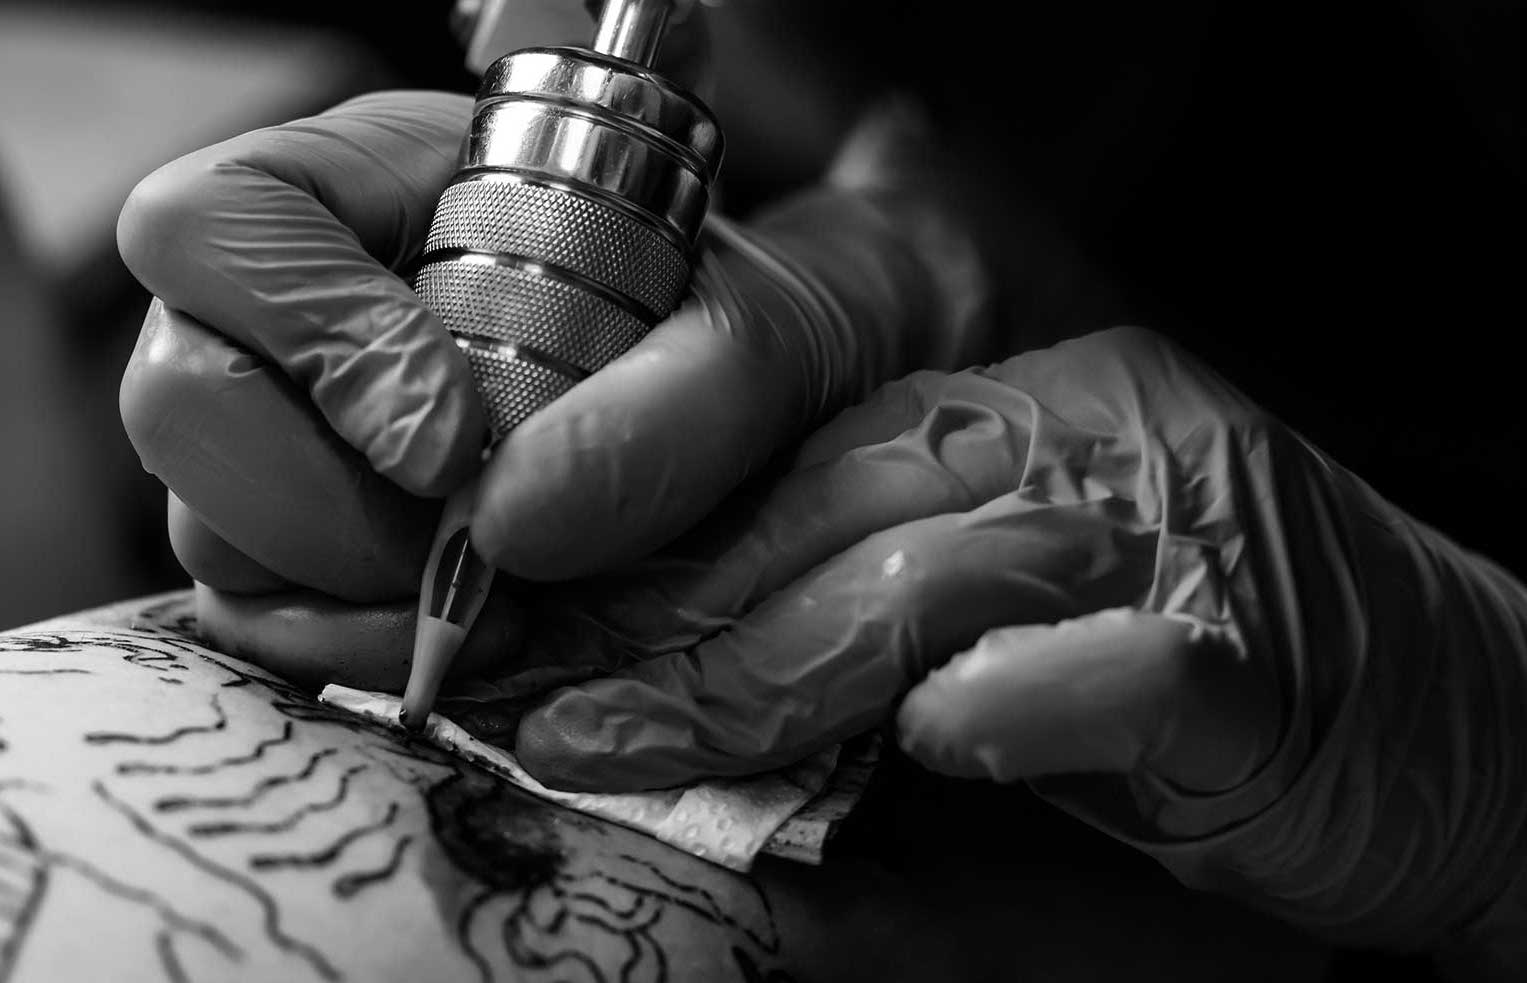 Capetonian giving free tattoos to post-mastectomy breast cancer survivors